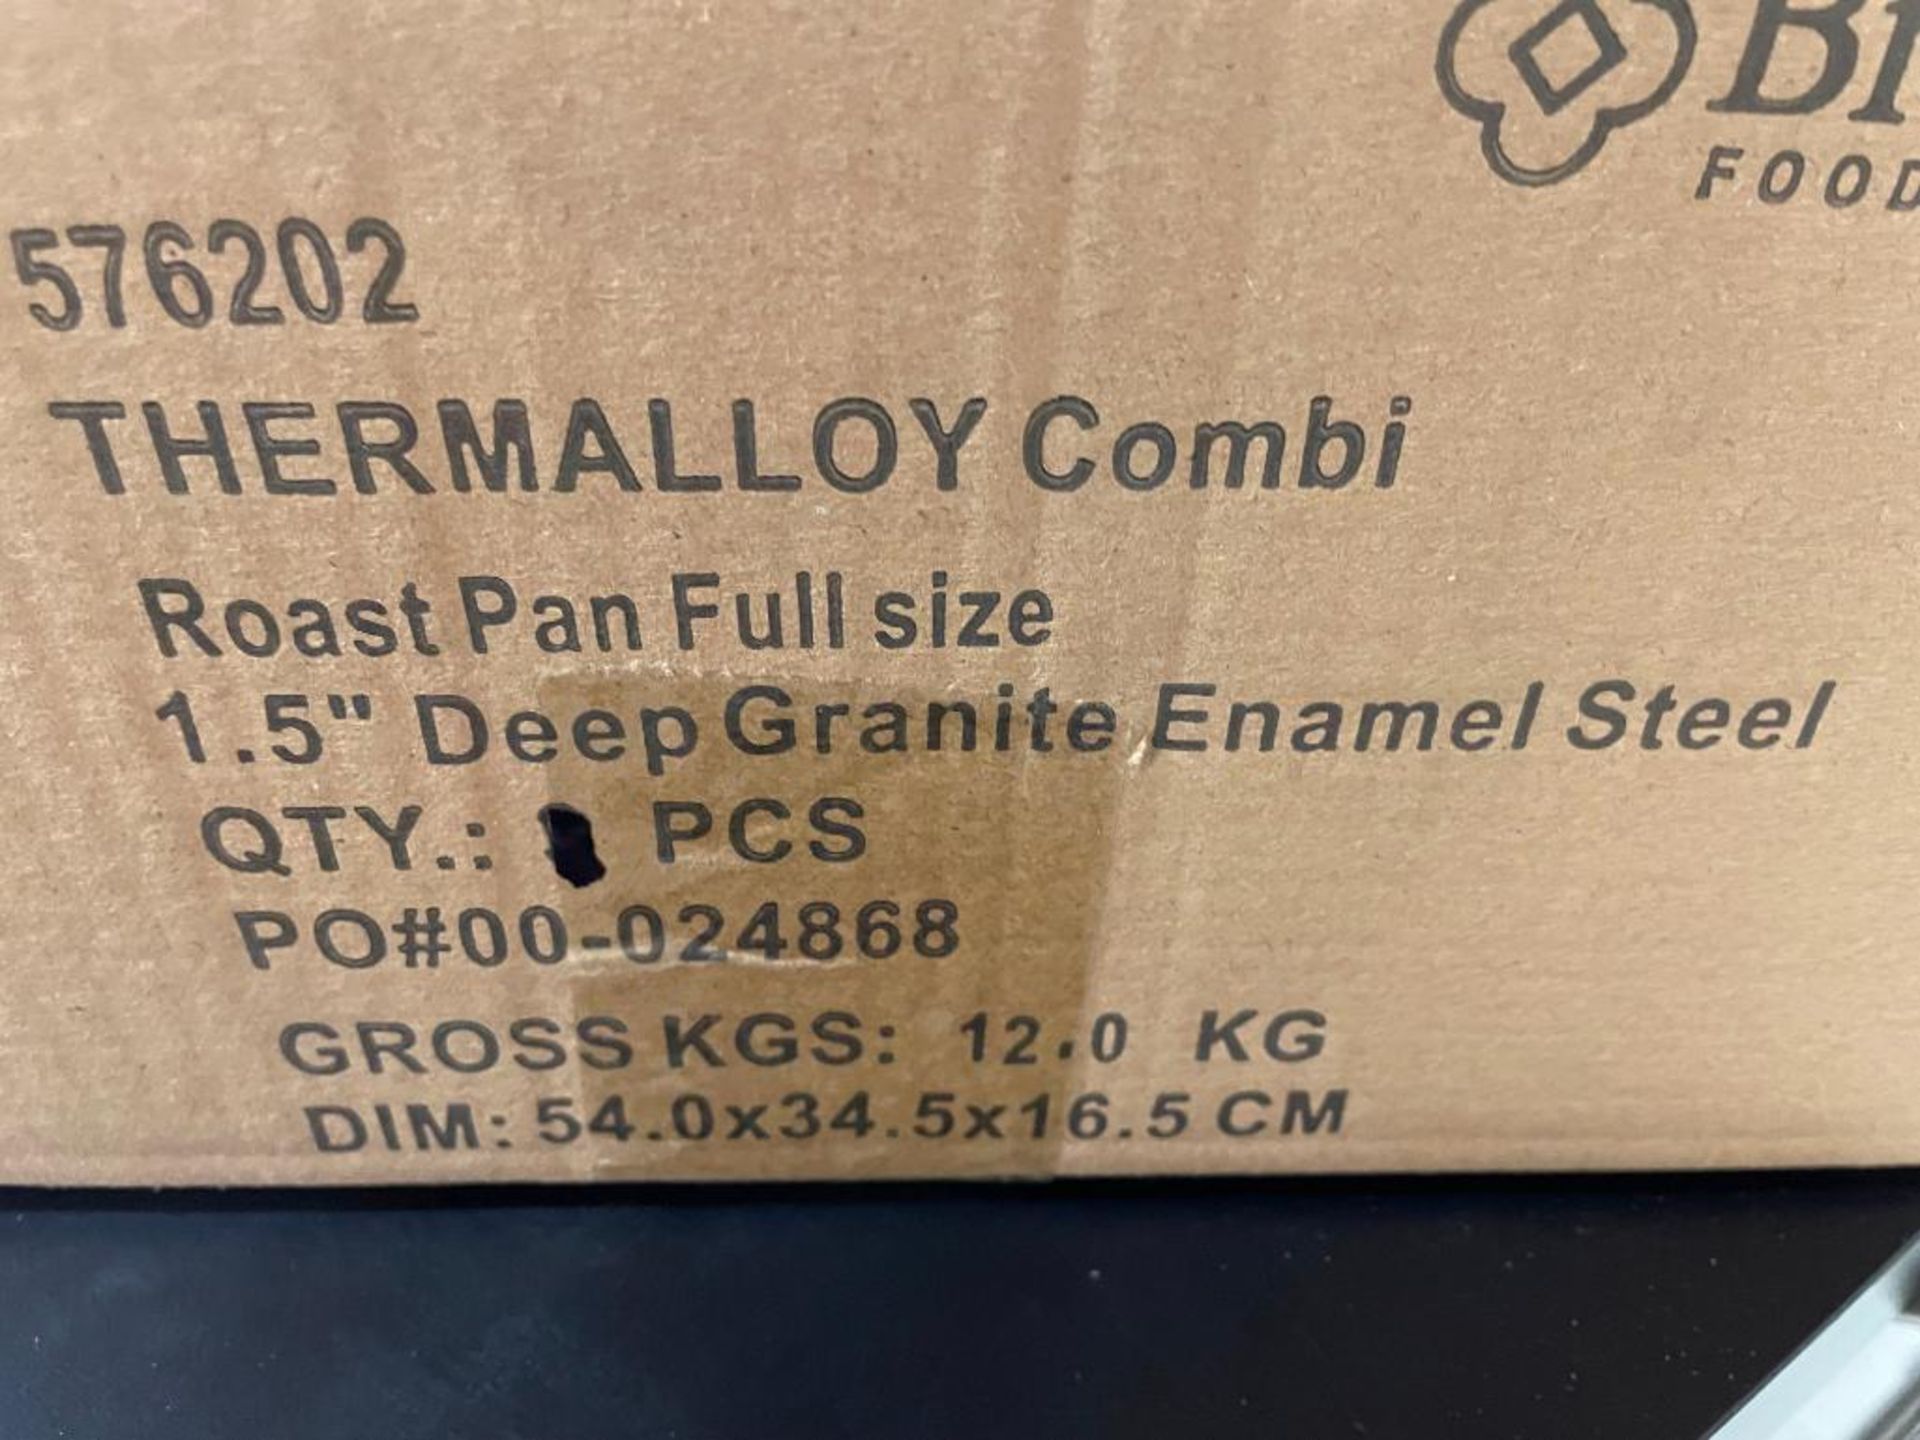 BROWNE 576202 THERMALLOY COMBI FULL-SIZE ROAST PAN FULL-SIZE - Image 3 of 4